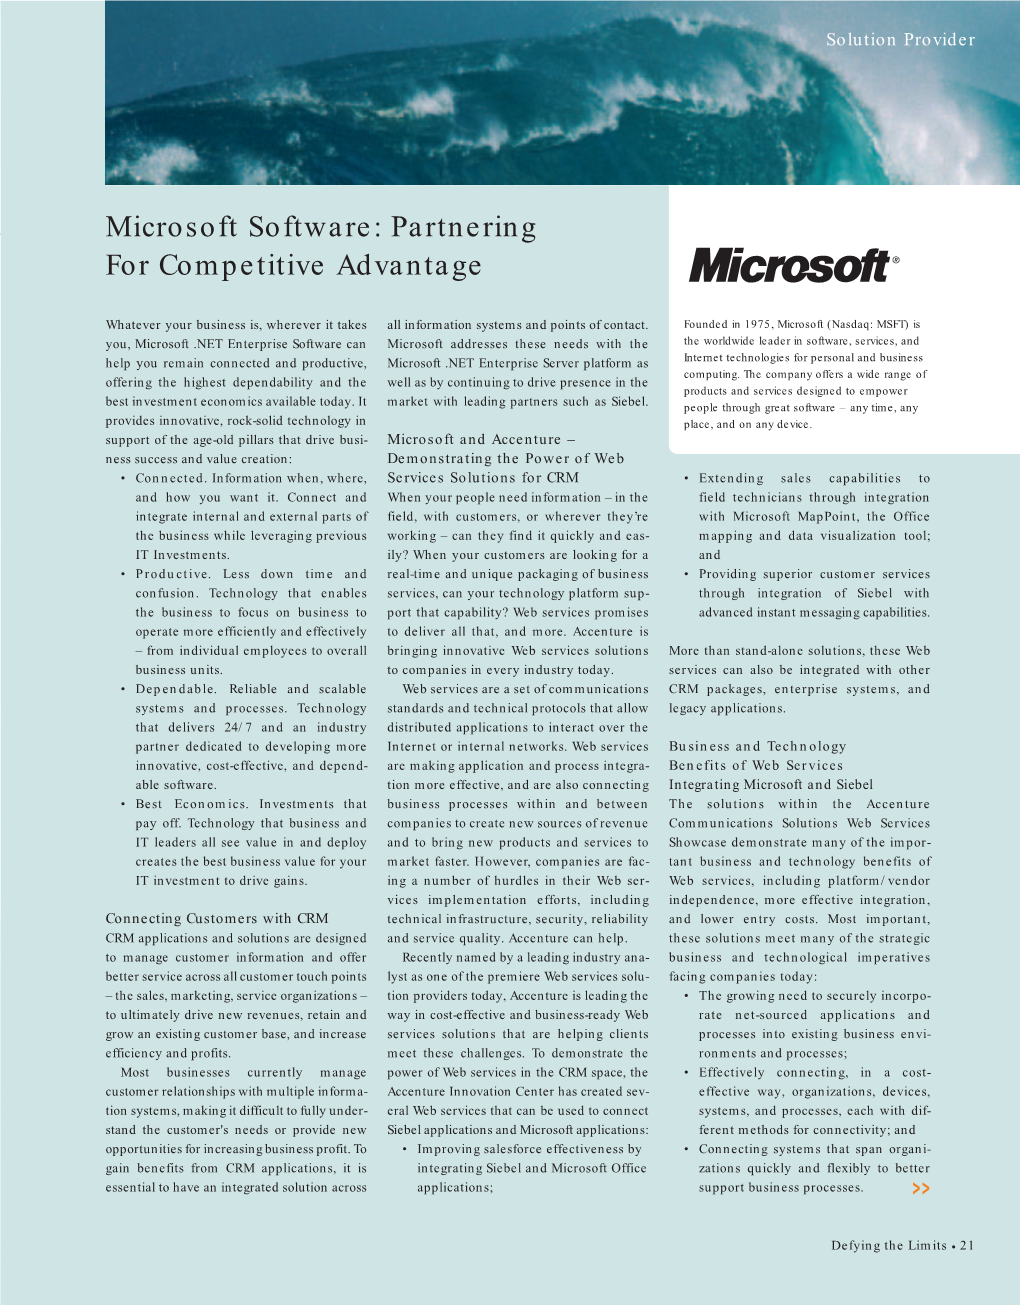 Microsoft Software: Partnering for Competitive Advantage